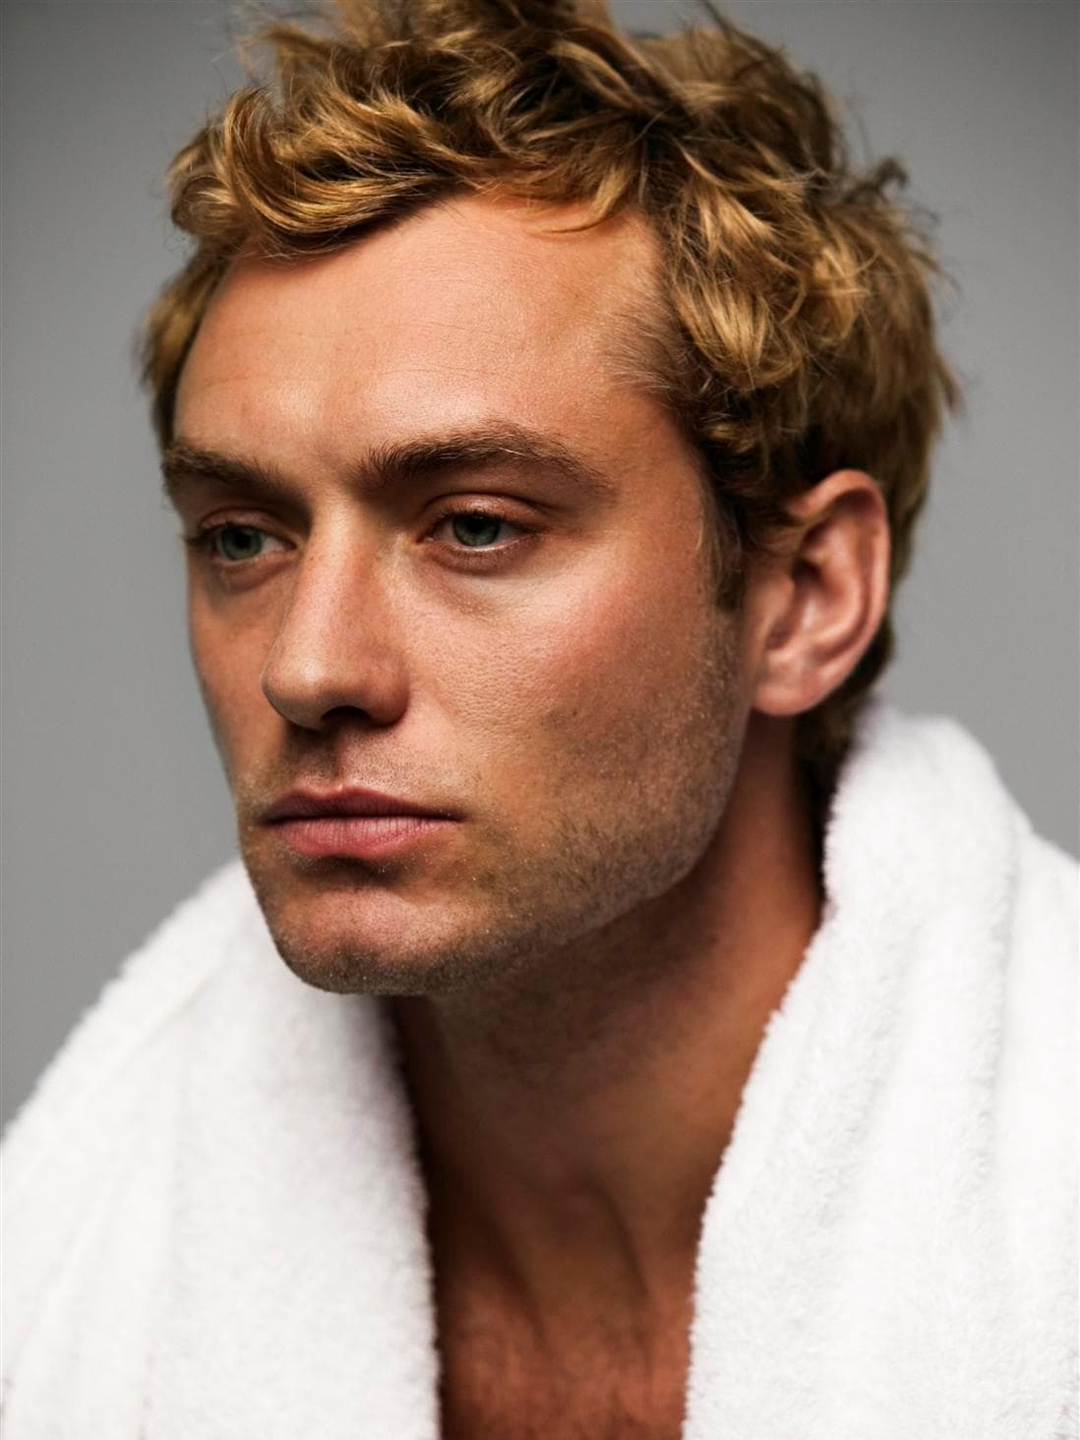 Jude Law height and weight